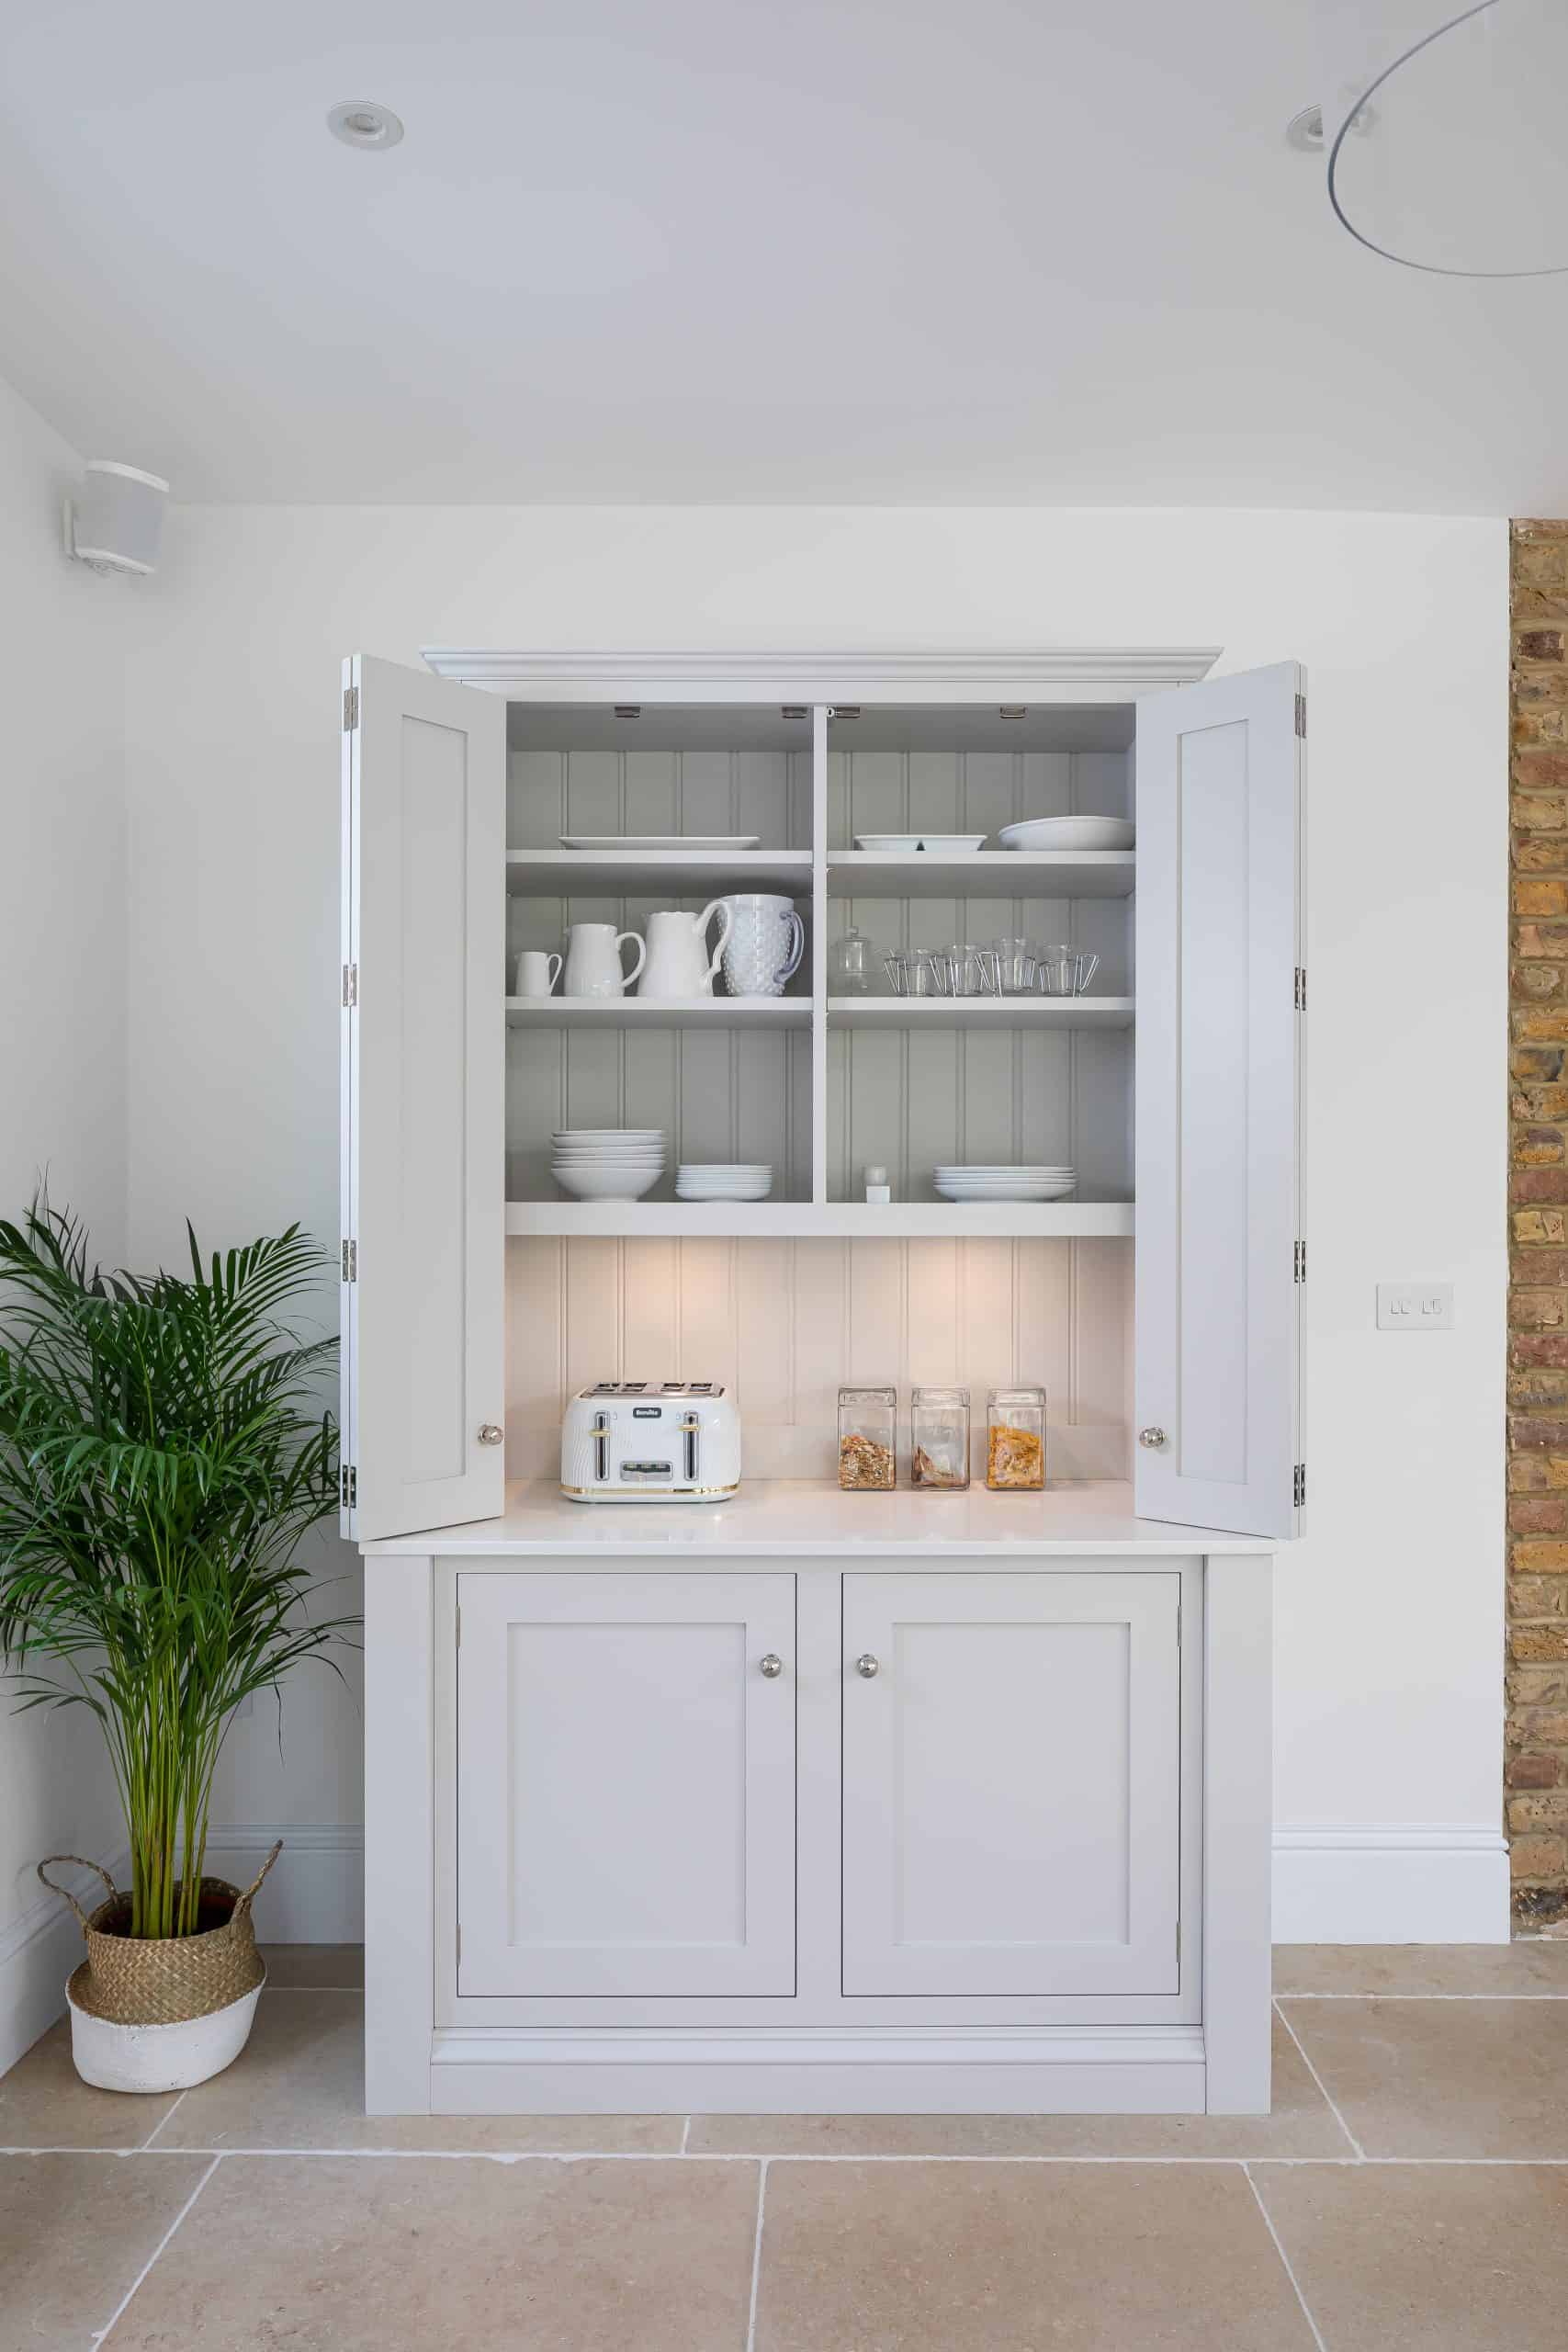 John Lewis of Hungerford Shaker style kitchen freestanding pantry storage in white wood